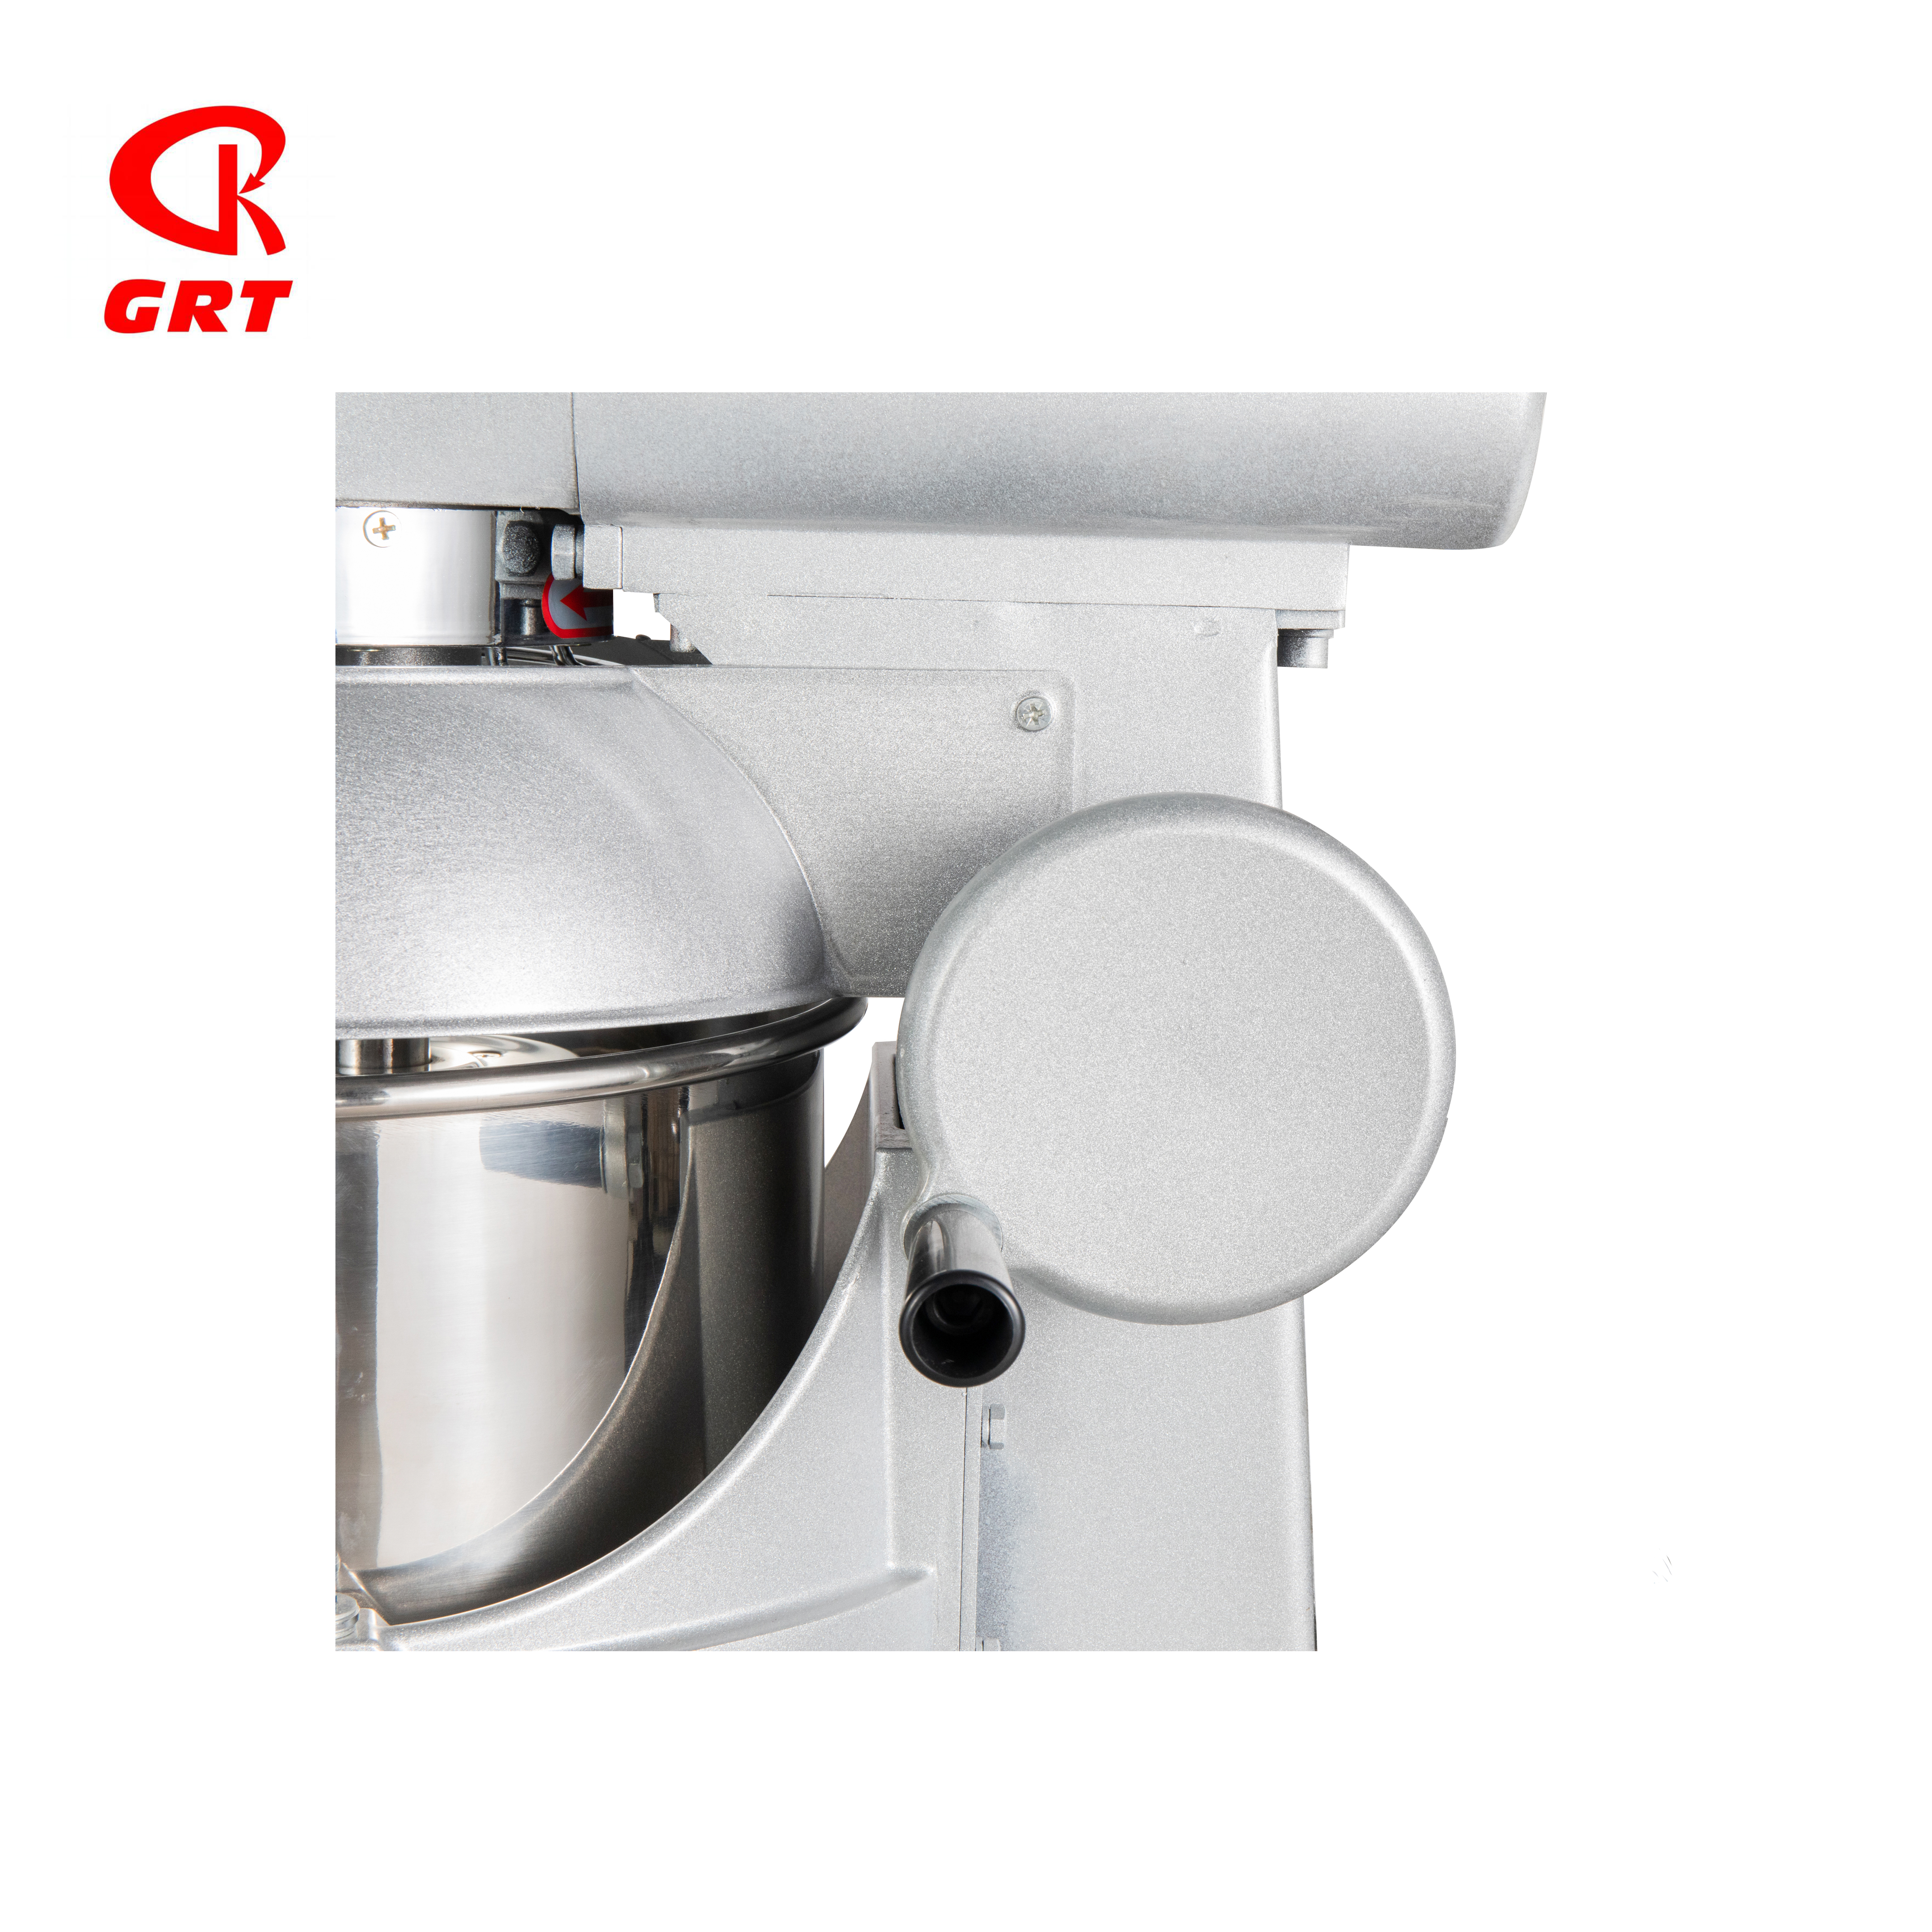 GRT-B15 Bakery Machines Commercial Food Mixer Planetary Cake Mixer